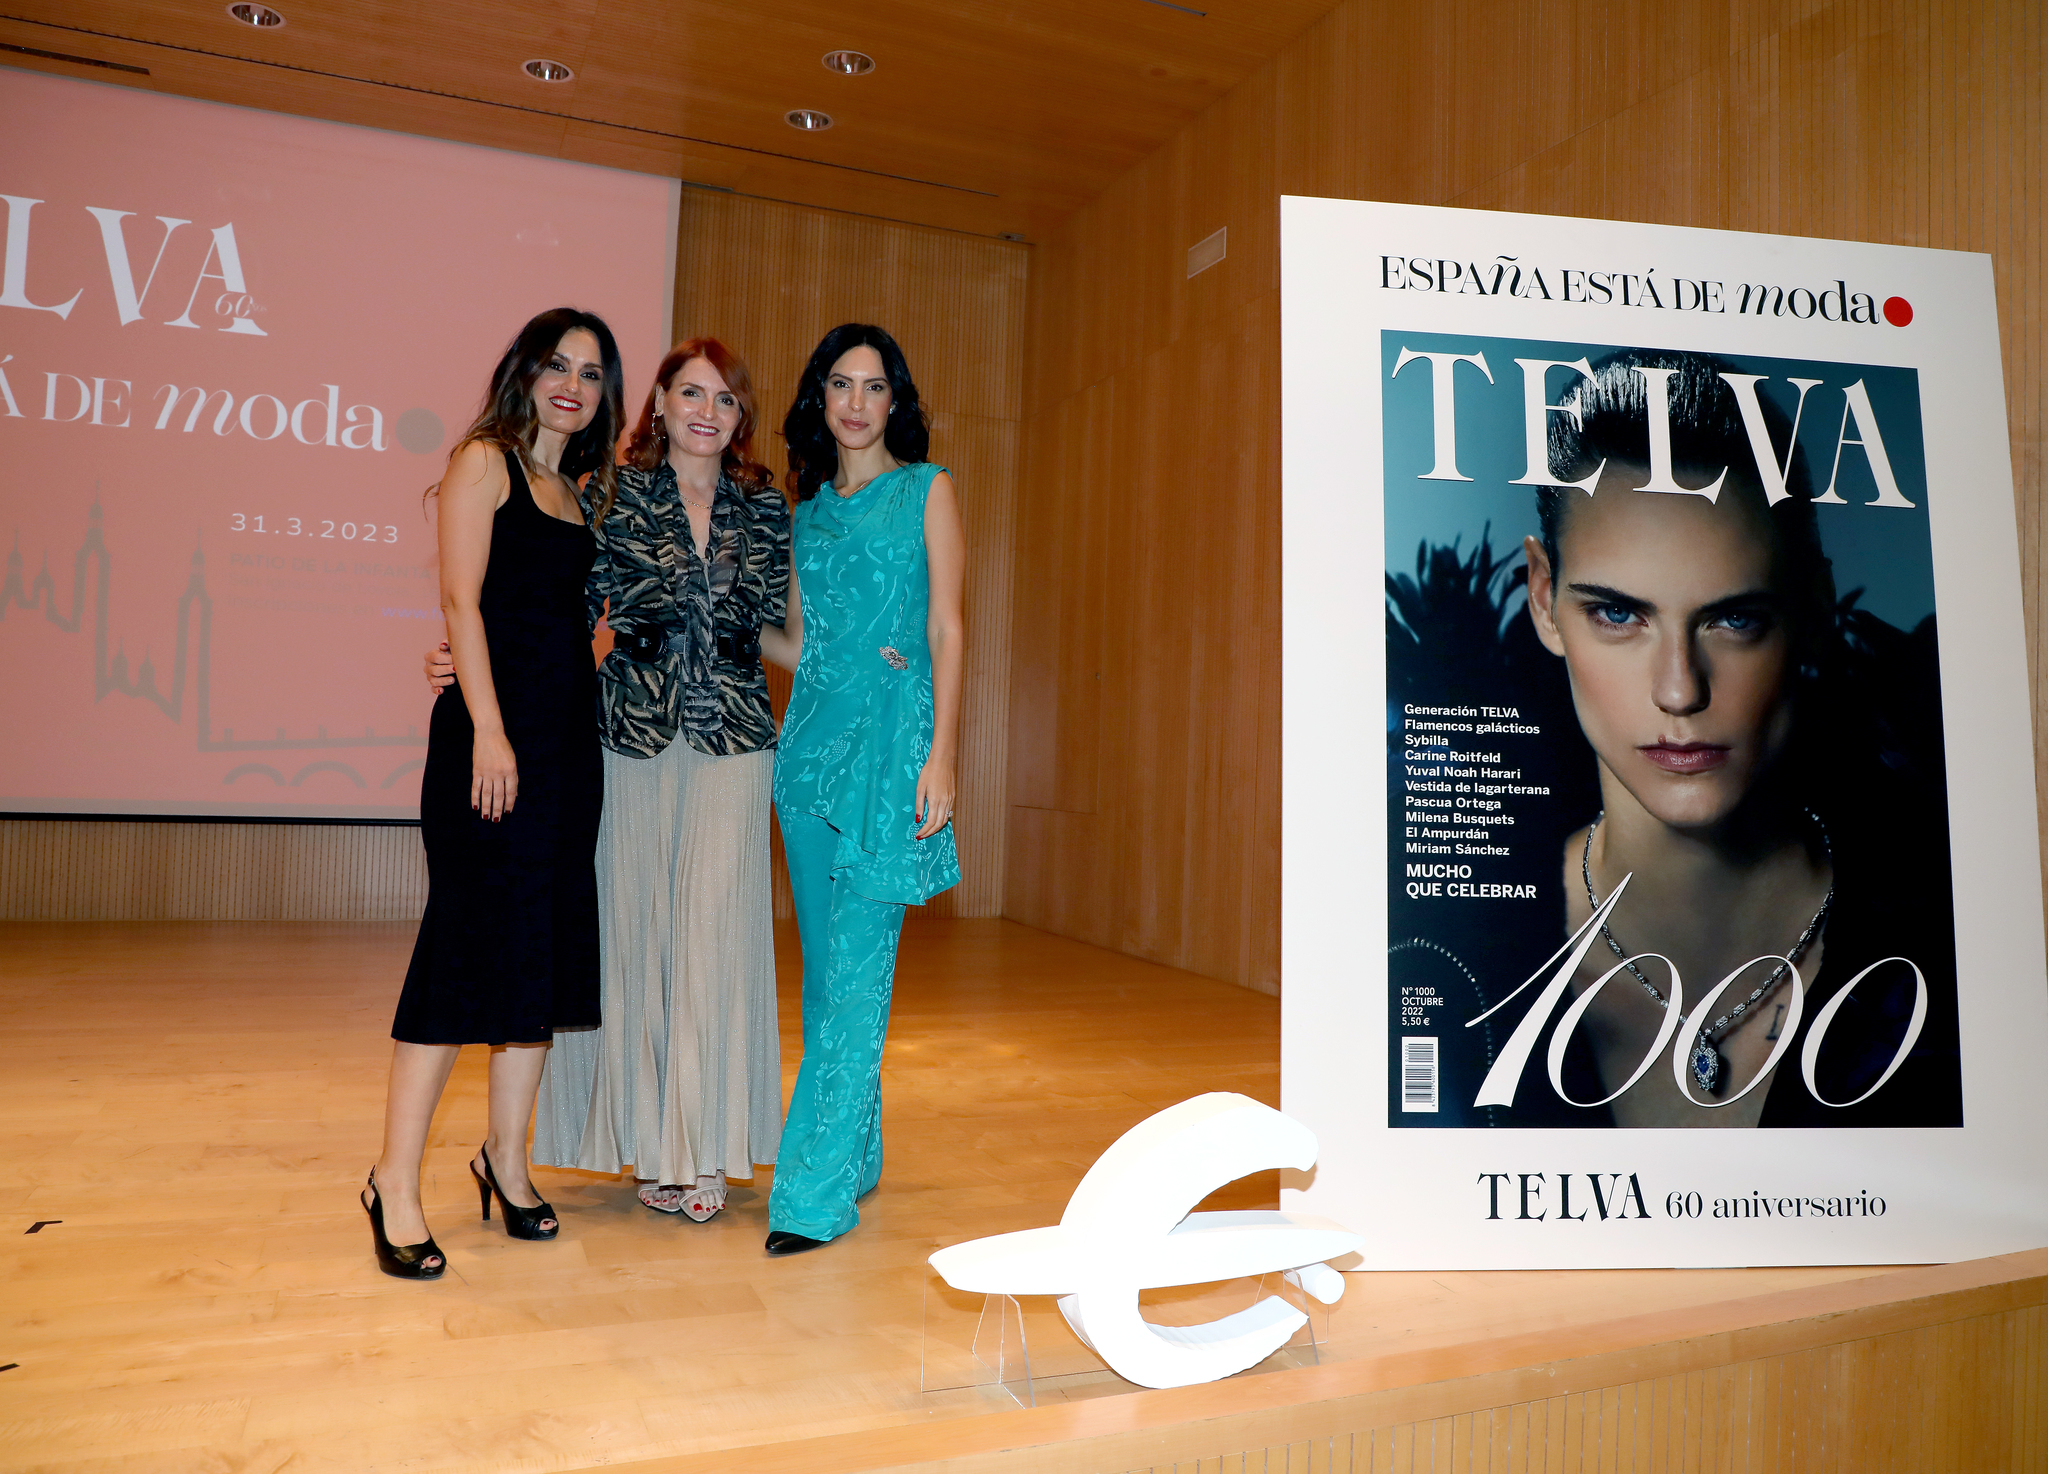 Mónica Martínez, Pau Amoretti and Natalia Fondevila during the Personal Image and Beauty Master Class held in the Aragón room of the Ibercaja building.